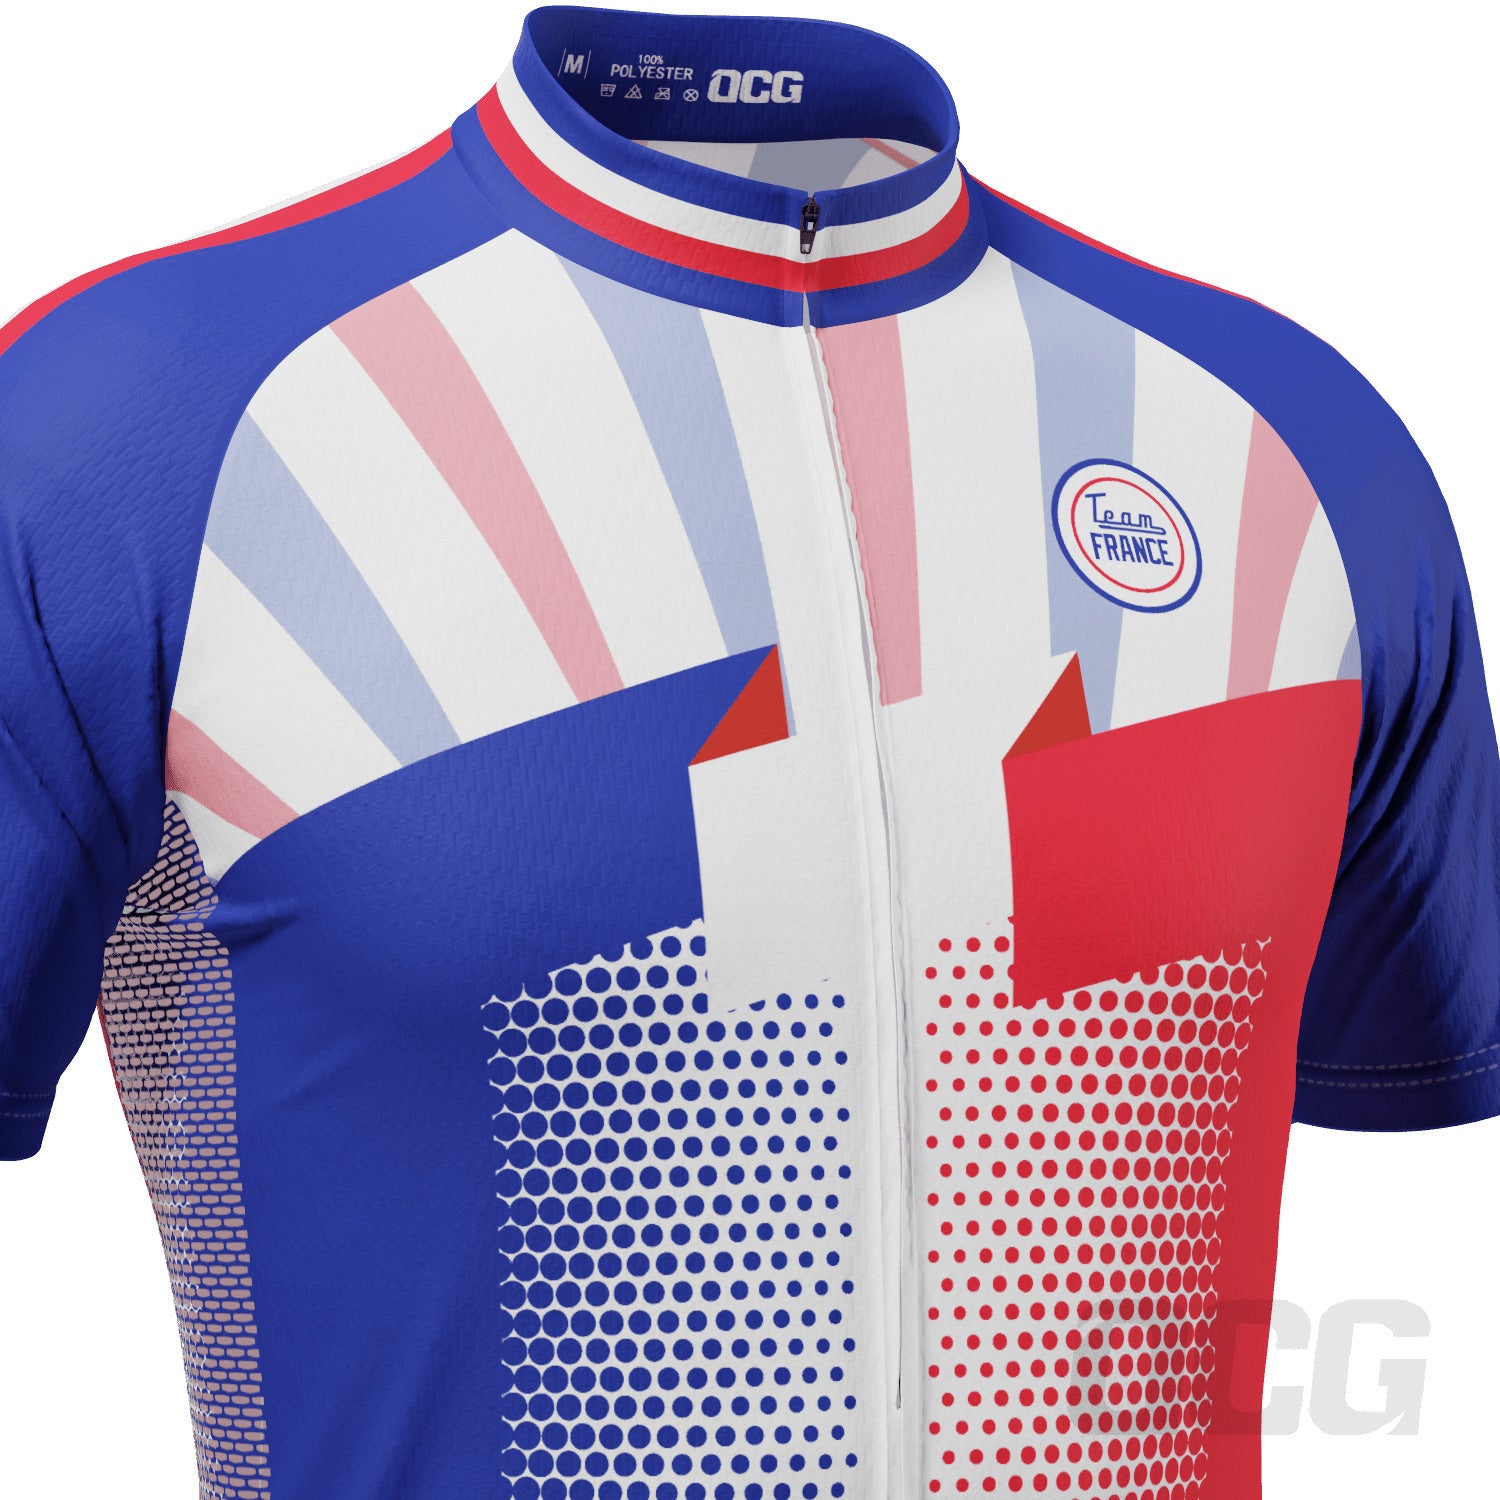 Men's World Countries Flag France Short Sleeve Cycling Jersey